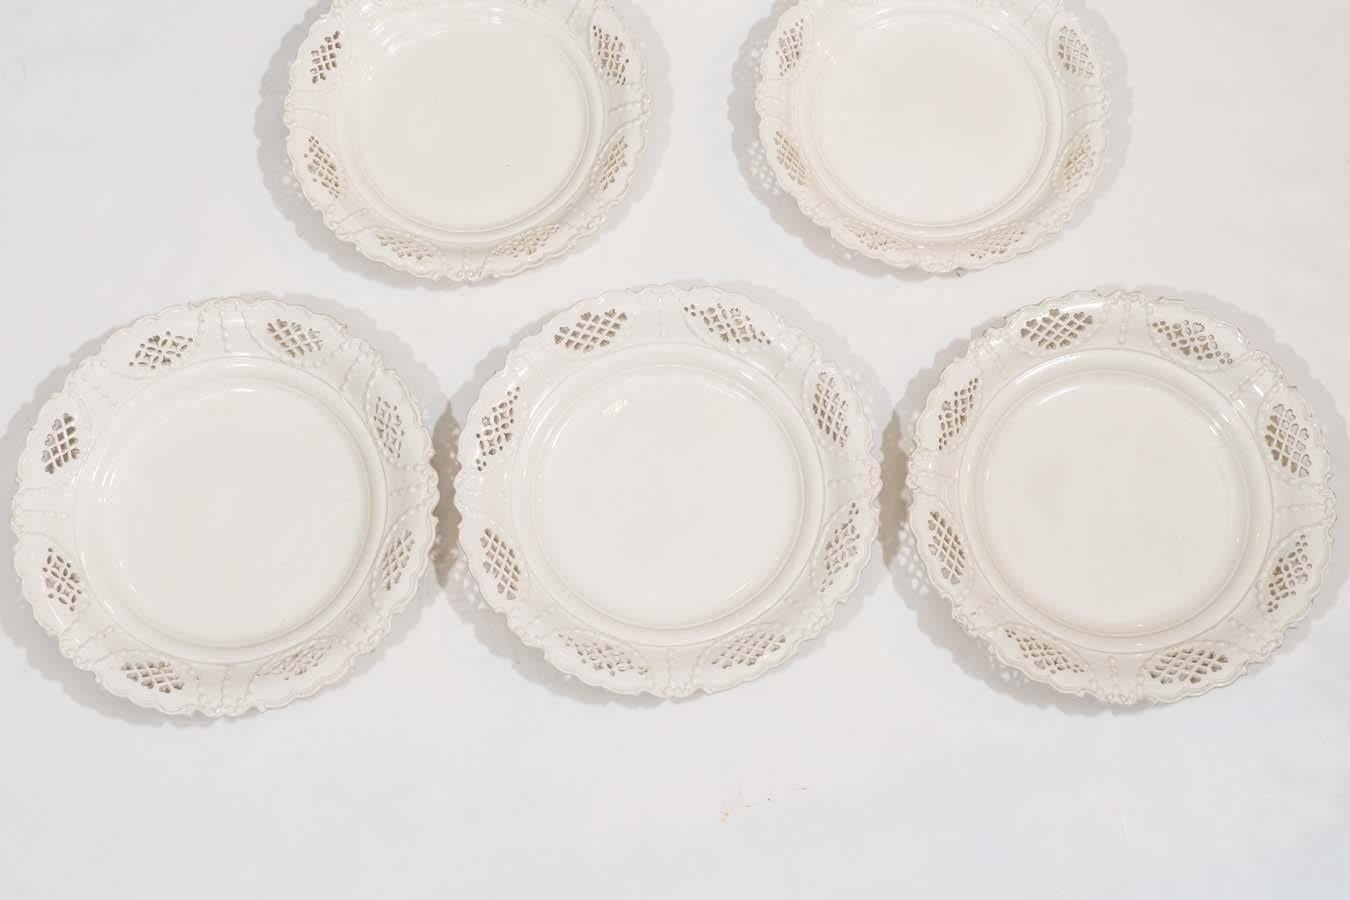 We have four dishes. A group of pierced creamware dishes made in England, circa 1800. The rim of each dish decorated with swags and eight pierced panels. The reticulated decoration includes hearts and diamonds. The borders have raised, lobed edges.